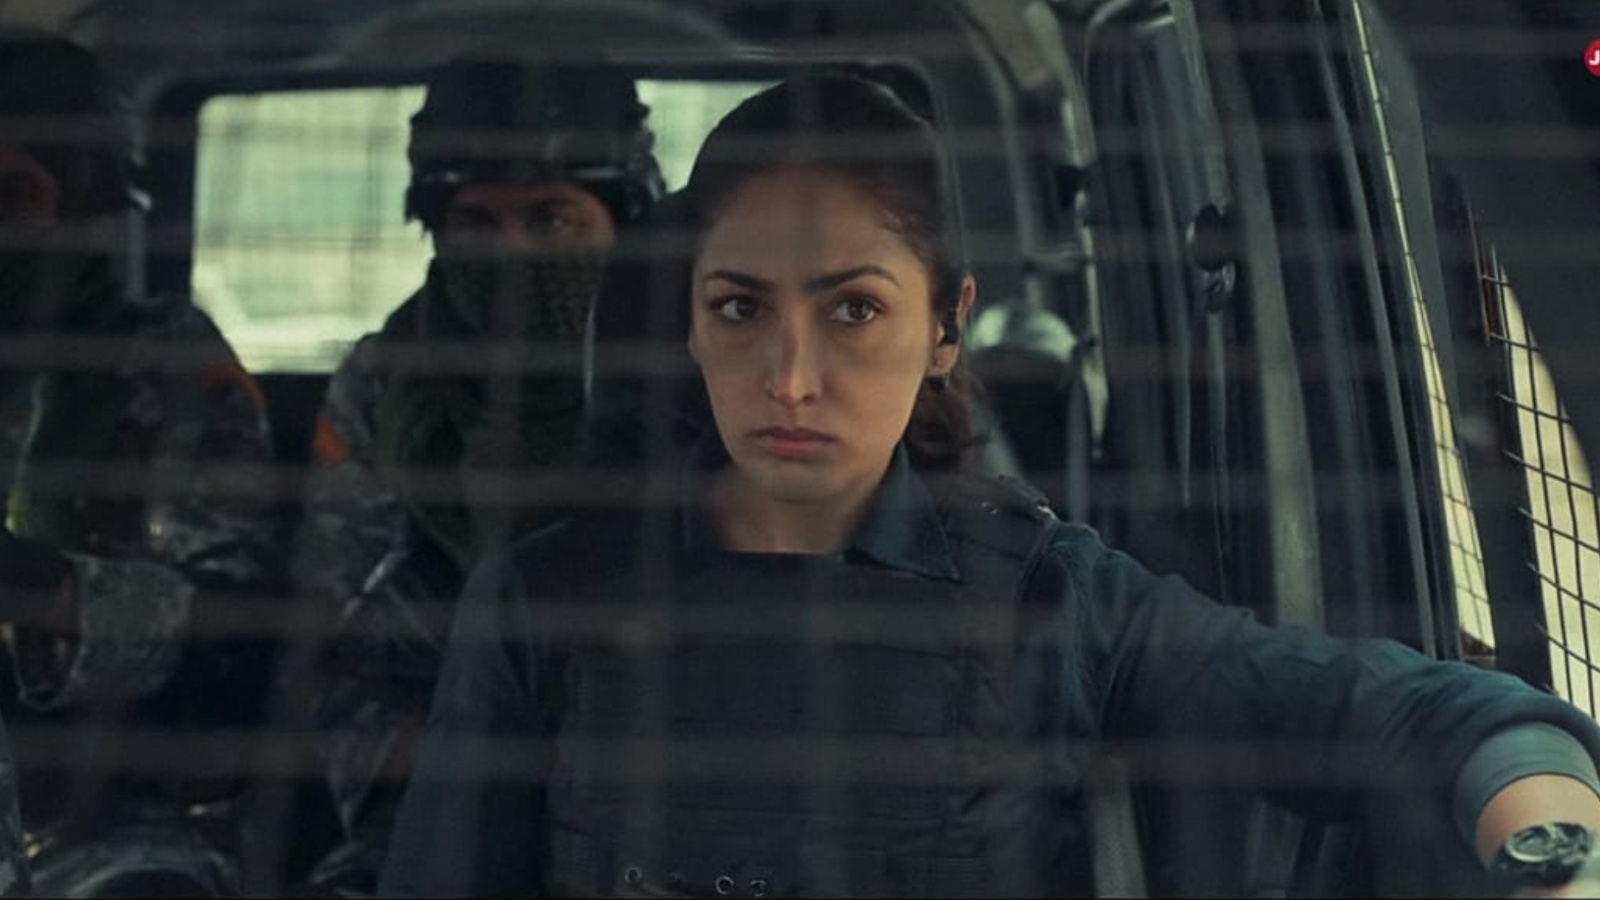 android, article 370 teaser: yami gautam wants to end terrorism in kashmir in new political action drama. watch